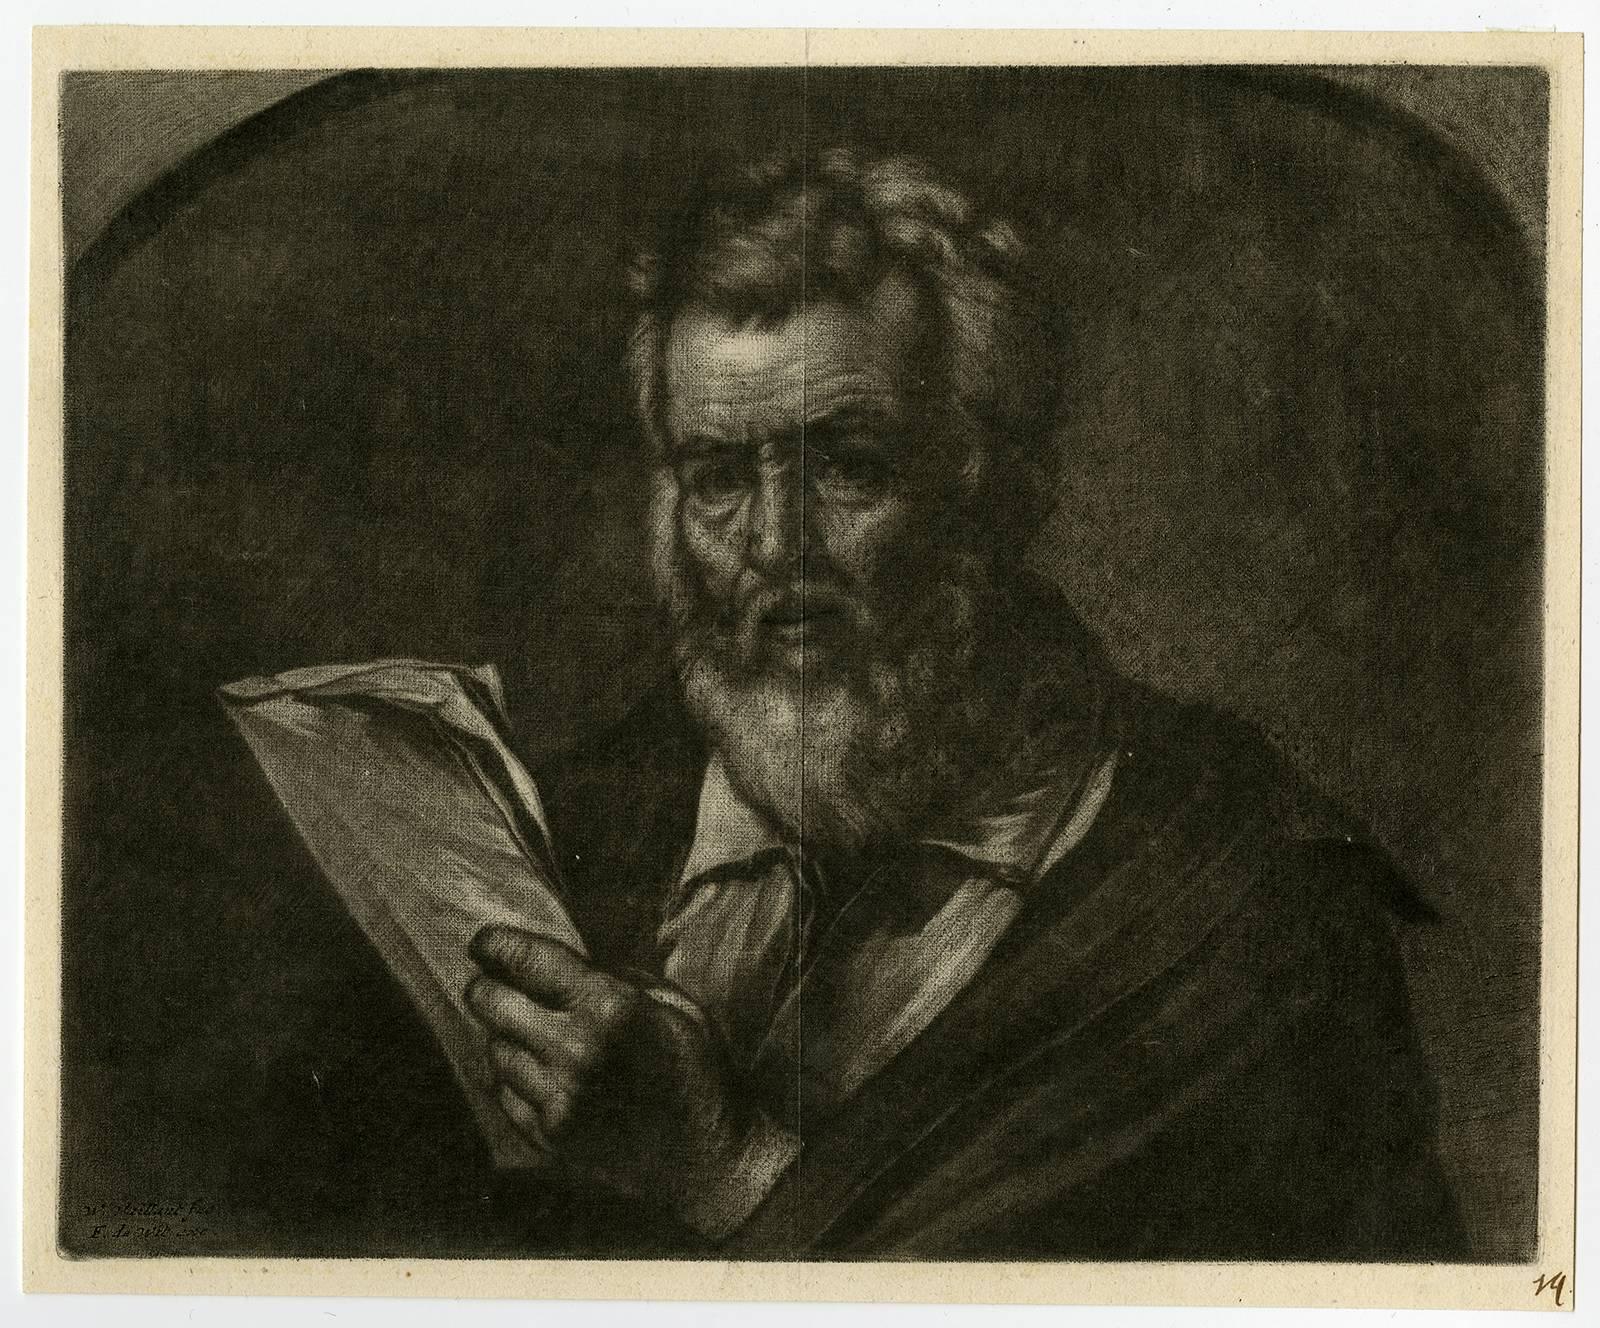 Wallerant Vaillant Portrait Print -  Untitled - A bearded man reading a pamphlet.